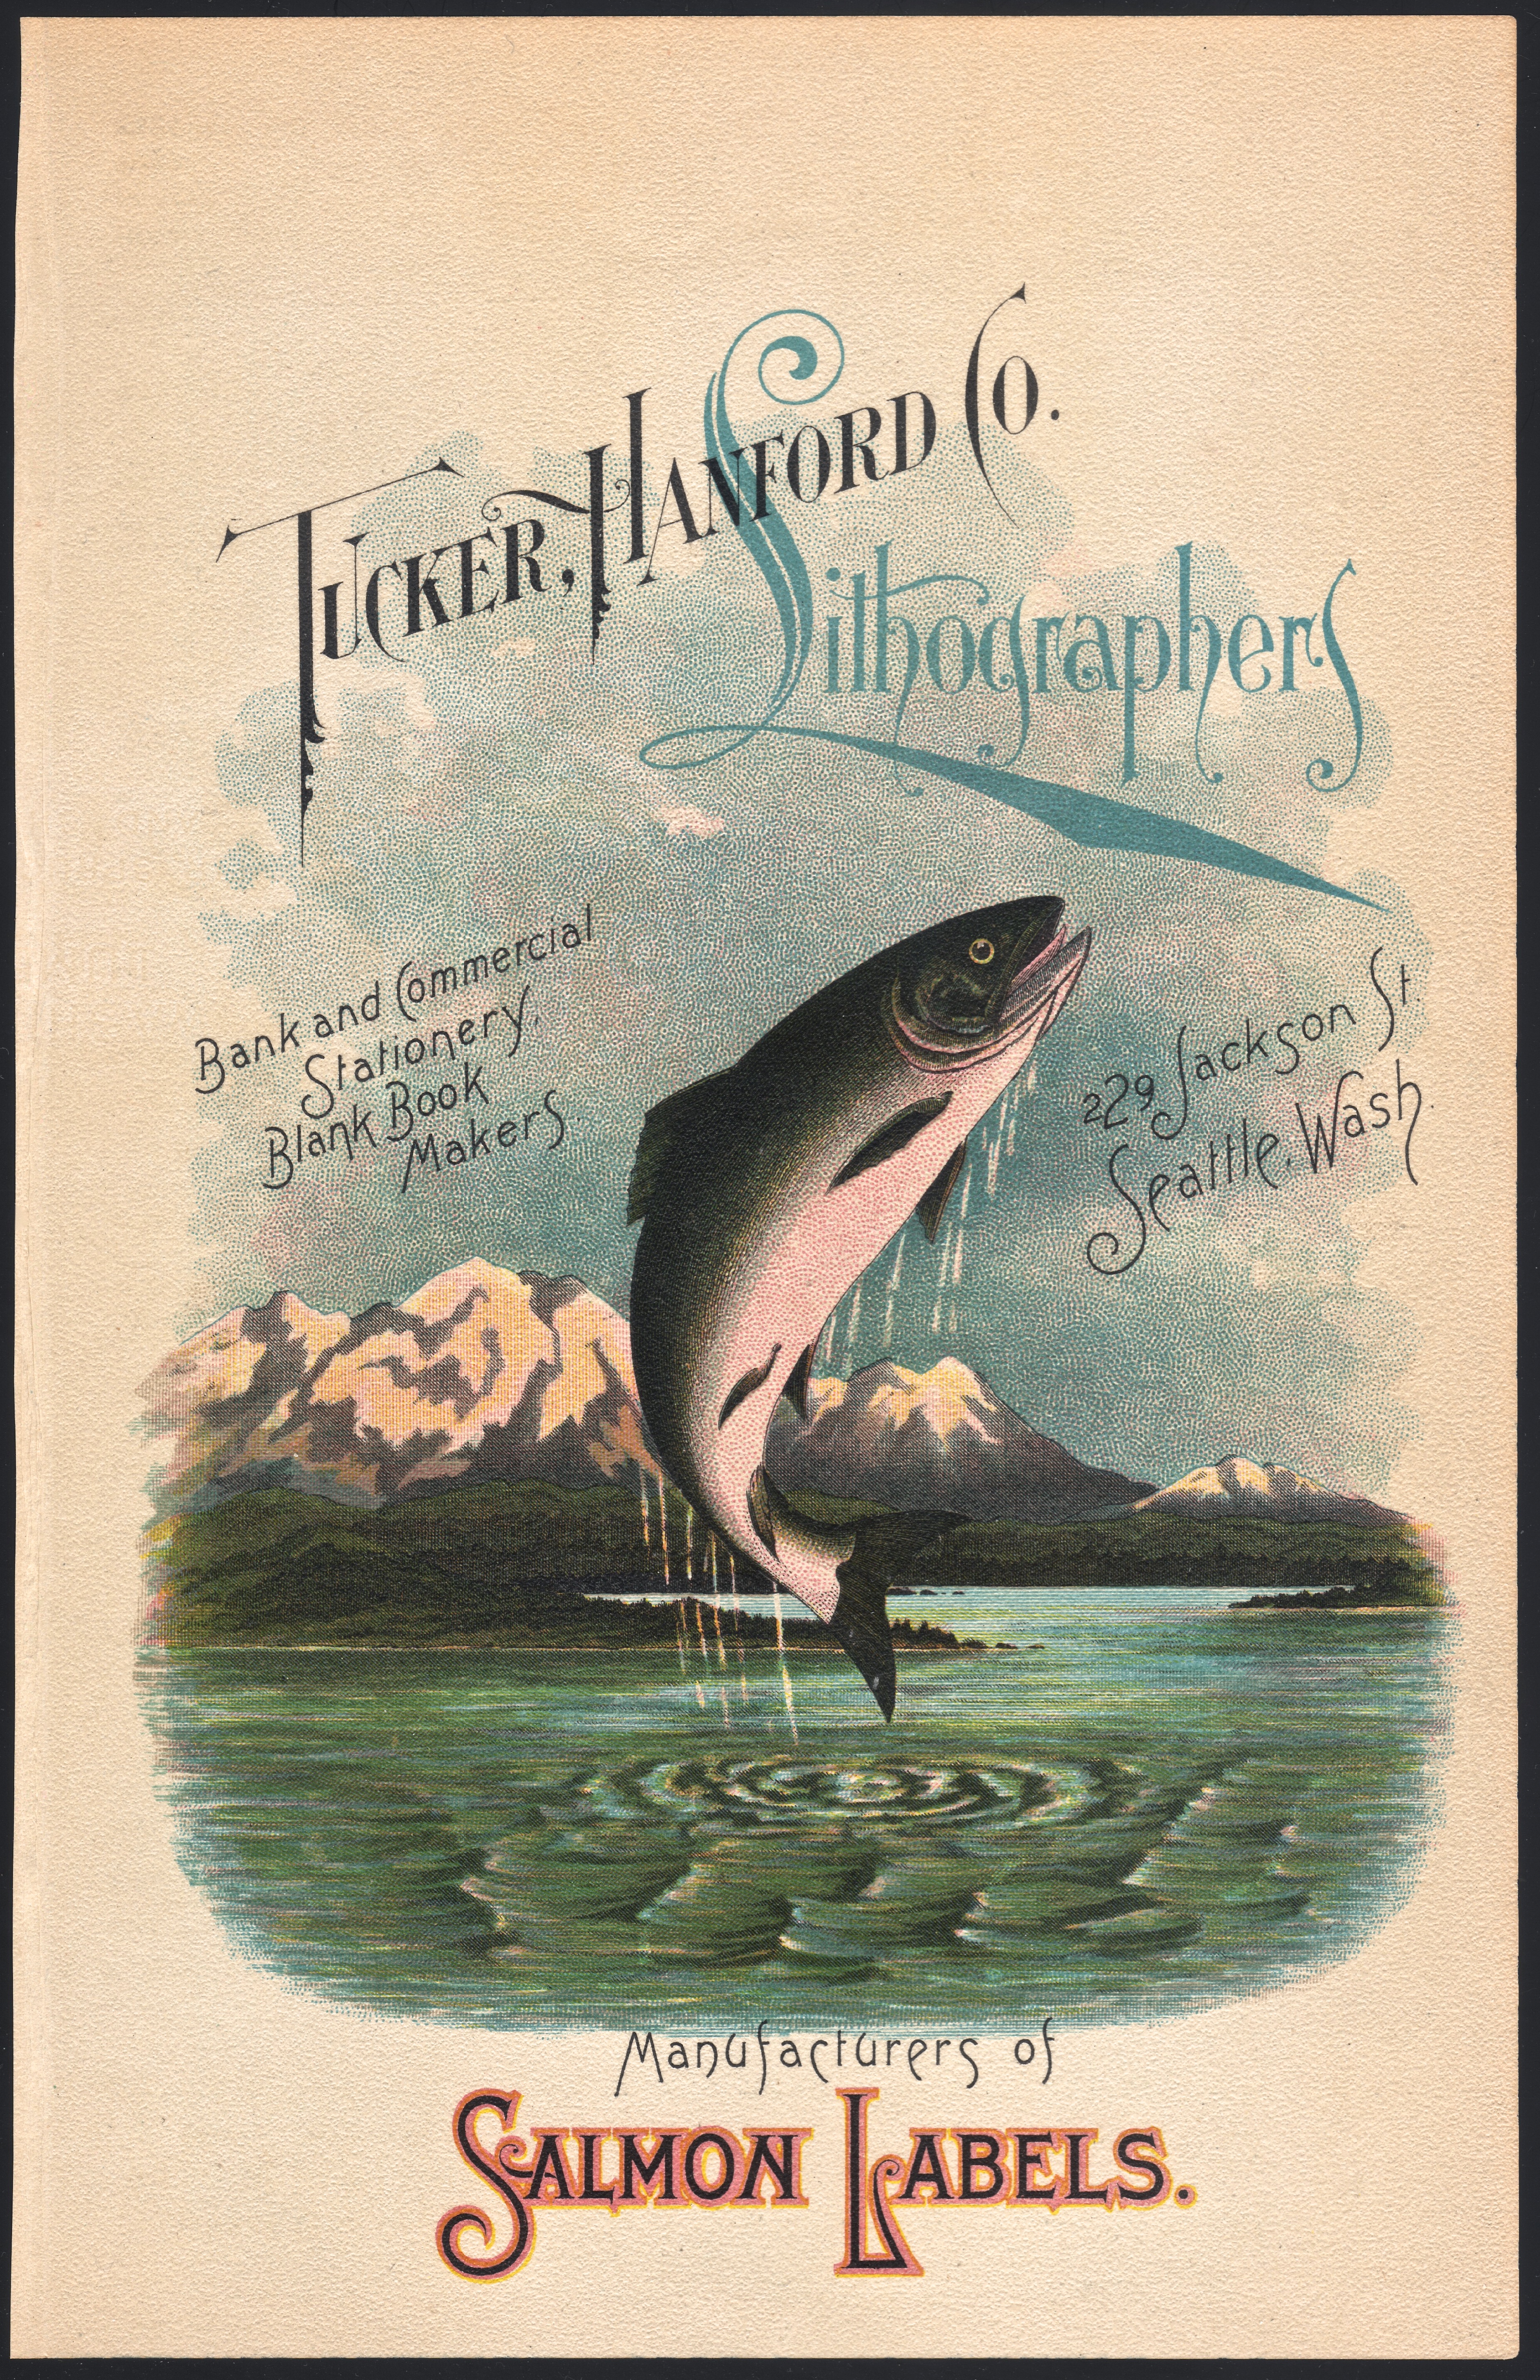 1890s Advertising by Tucker, Hanford Co. – manufacturers of salmon labels